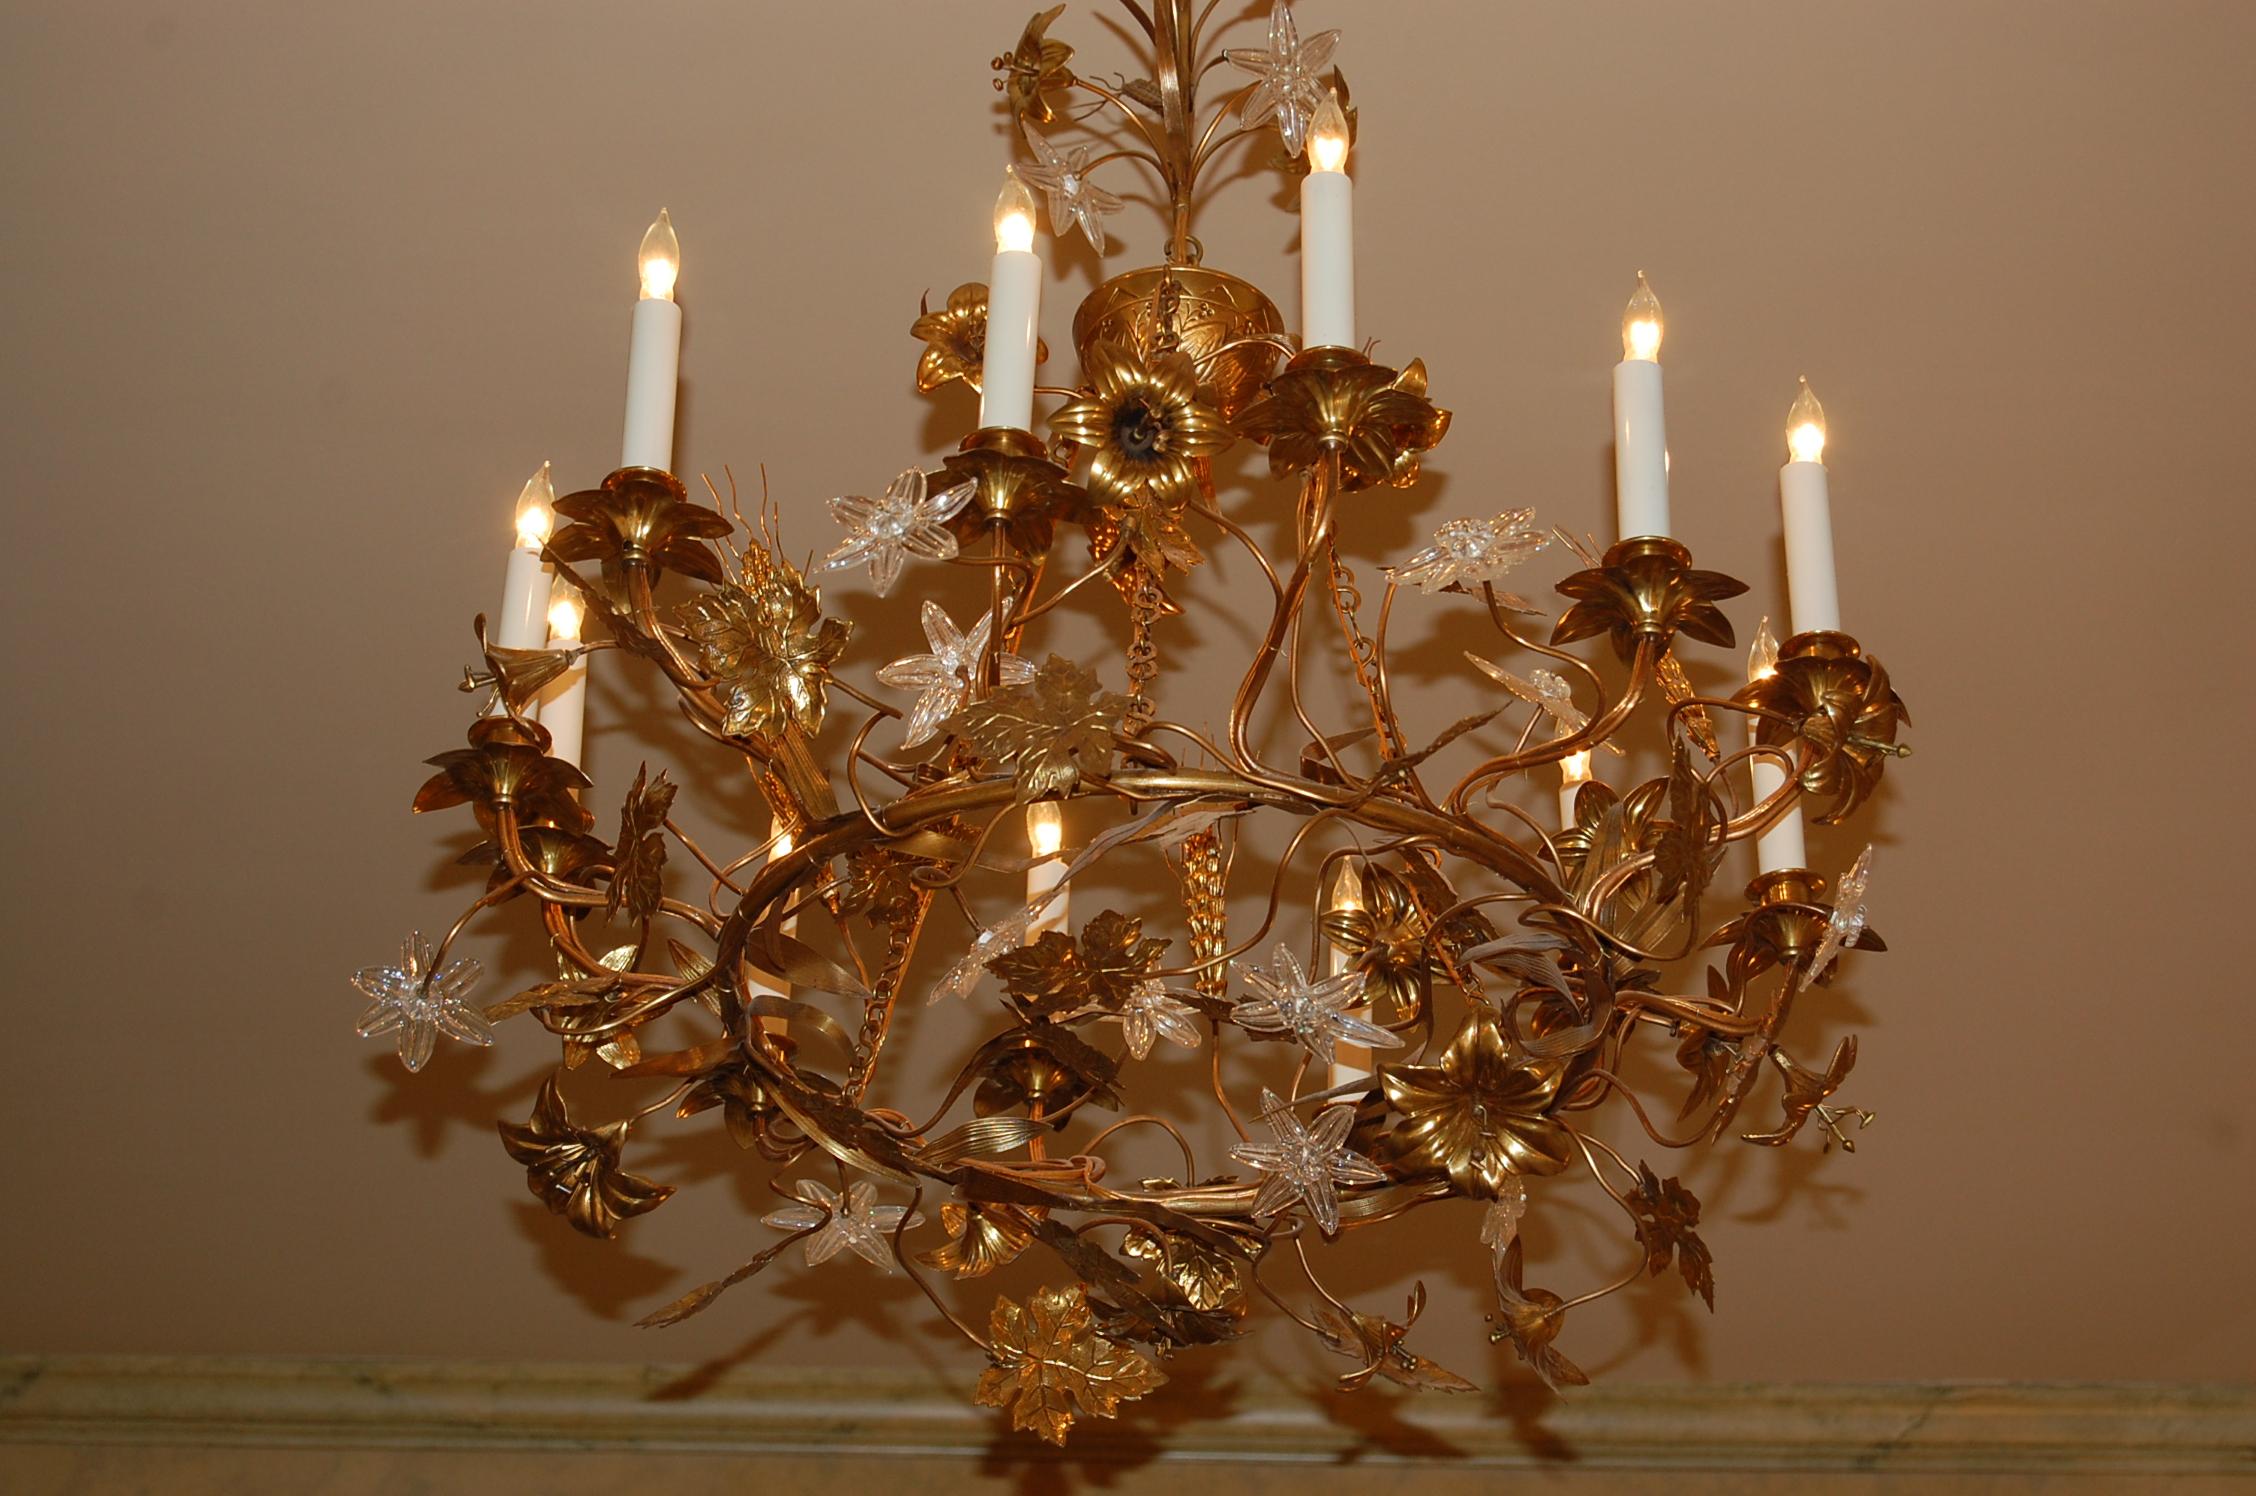 Gilt Brass Chandelier with Clusters of Brass Grapes, Leaves and Sheaths of Wheat 5